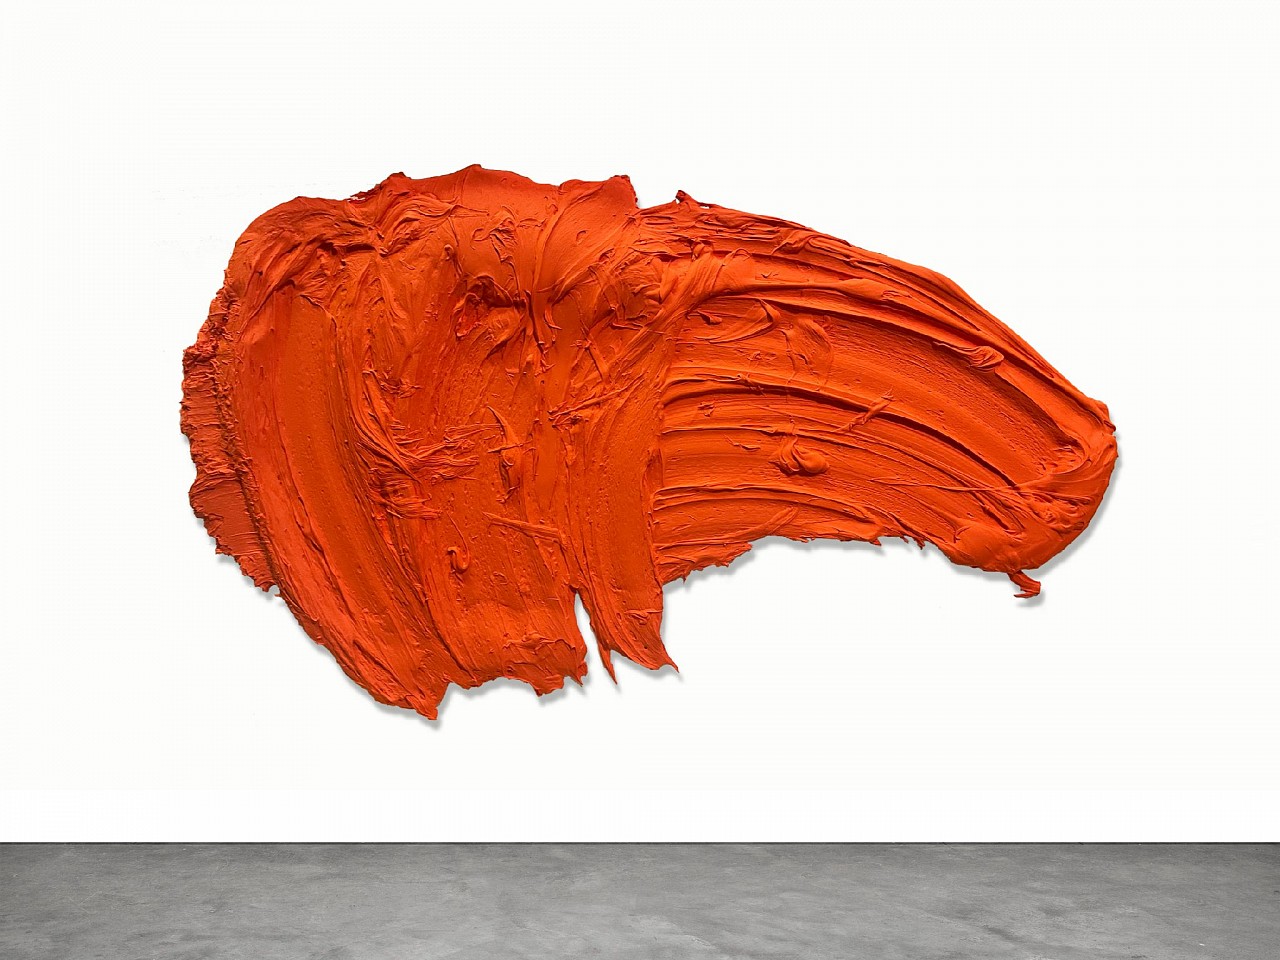 Donald Martiny, Meherrin, ca. 2014
polymer and pigment on aluminum, 45 x 76 in.
MART00144